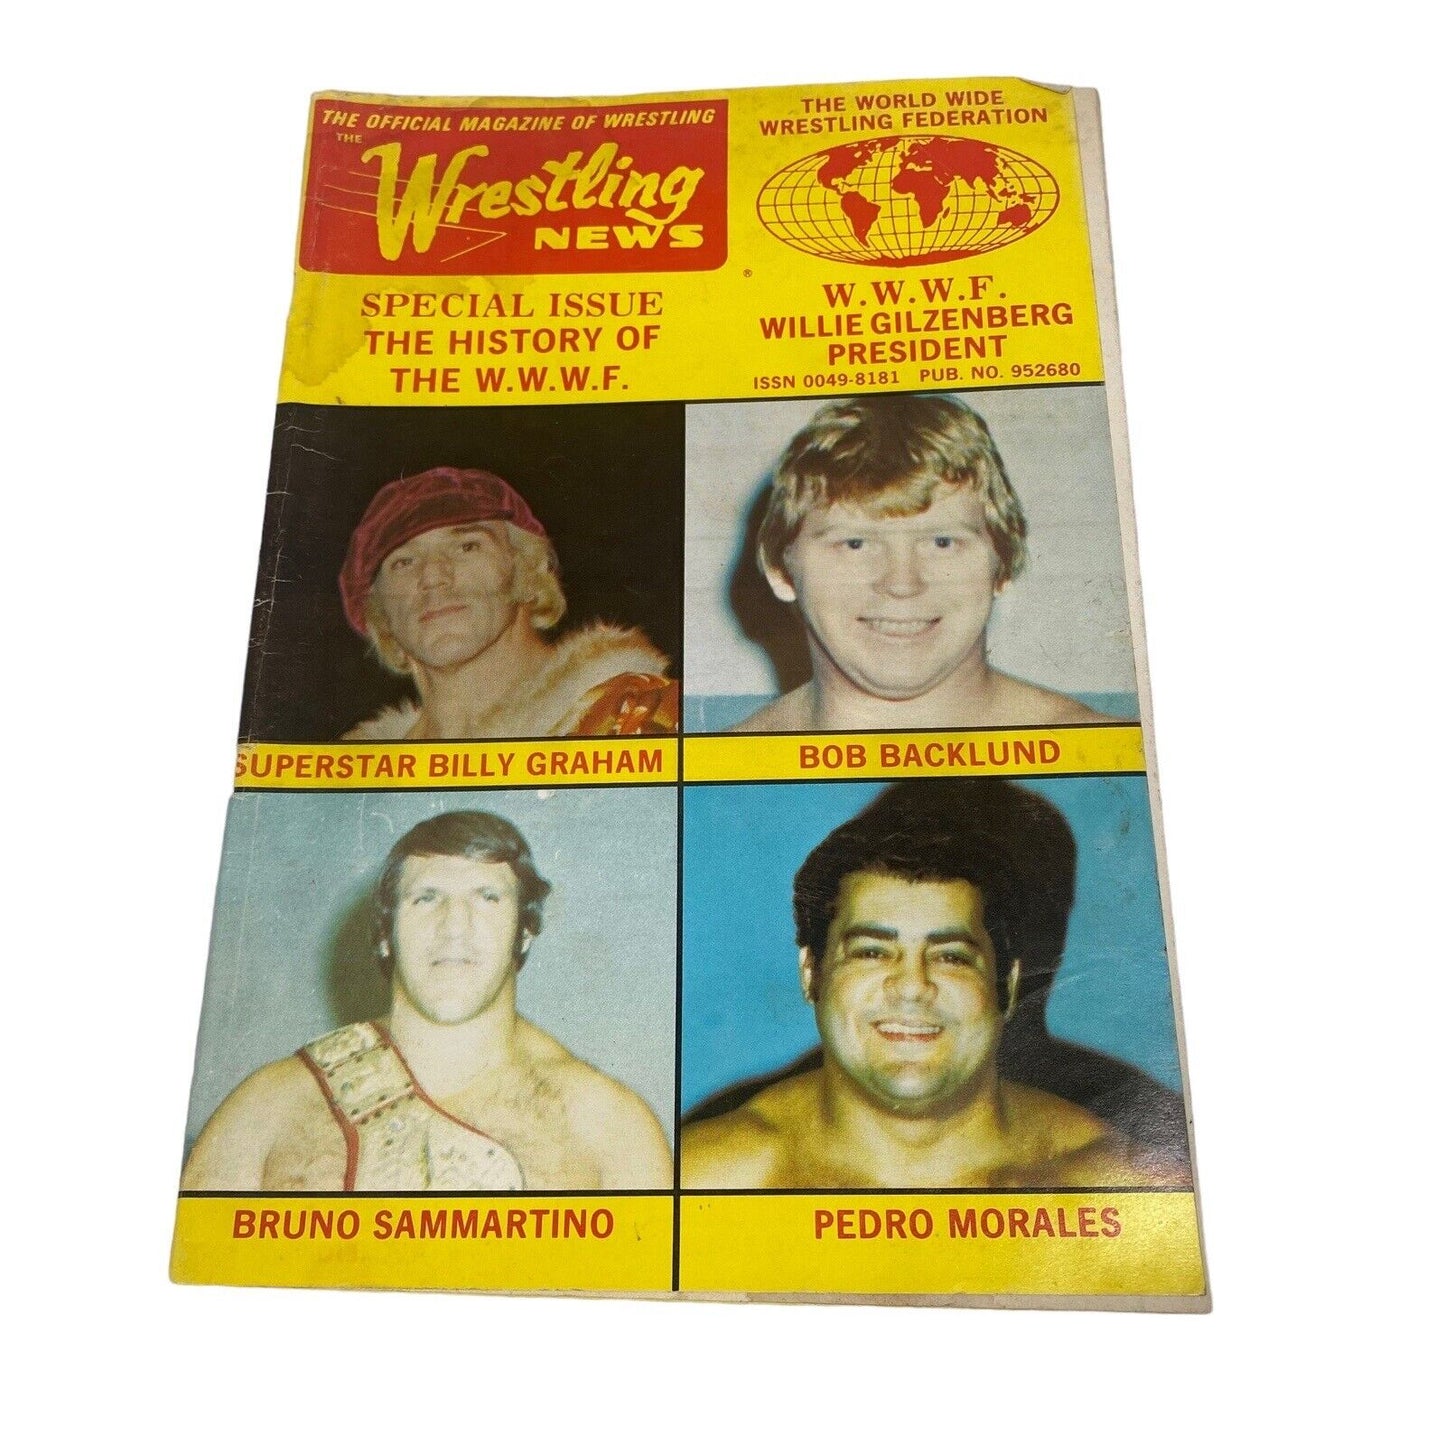 Wrestling News SPECIAL ISSUE THE HISTORY OF THE W.W.W.F. Pre-WWE VTG 1970s